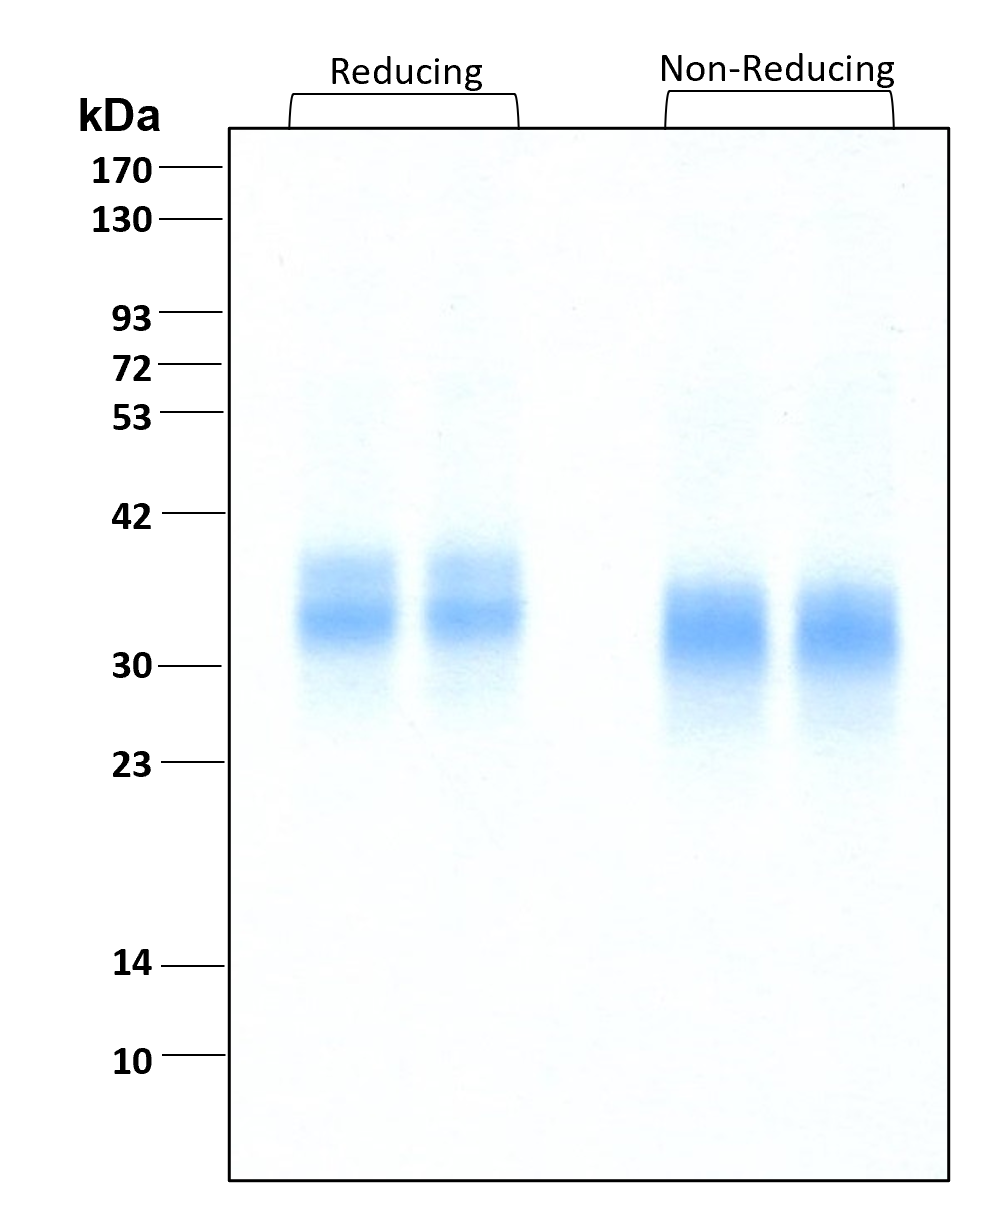 Purity of recombinant human DKK-1 was determined by SDS- polyacrylamide gel electrophoresis. The protein was resolved in an SDS- polyacrylamide gel in reducing and non-reducing conditions and stained using Coomassie blue.